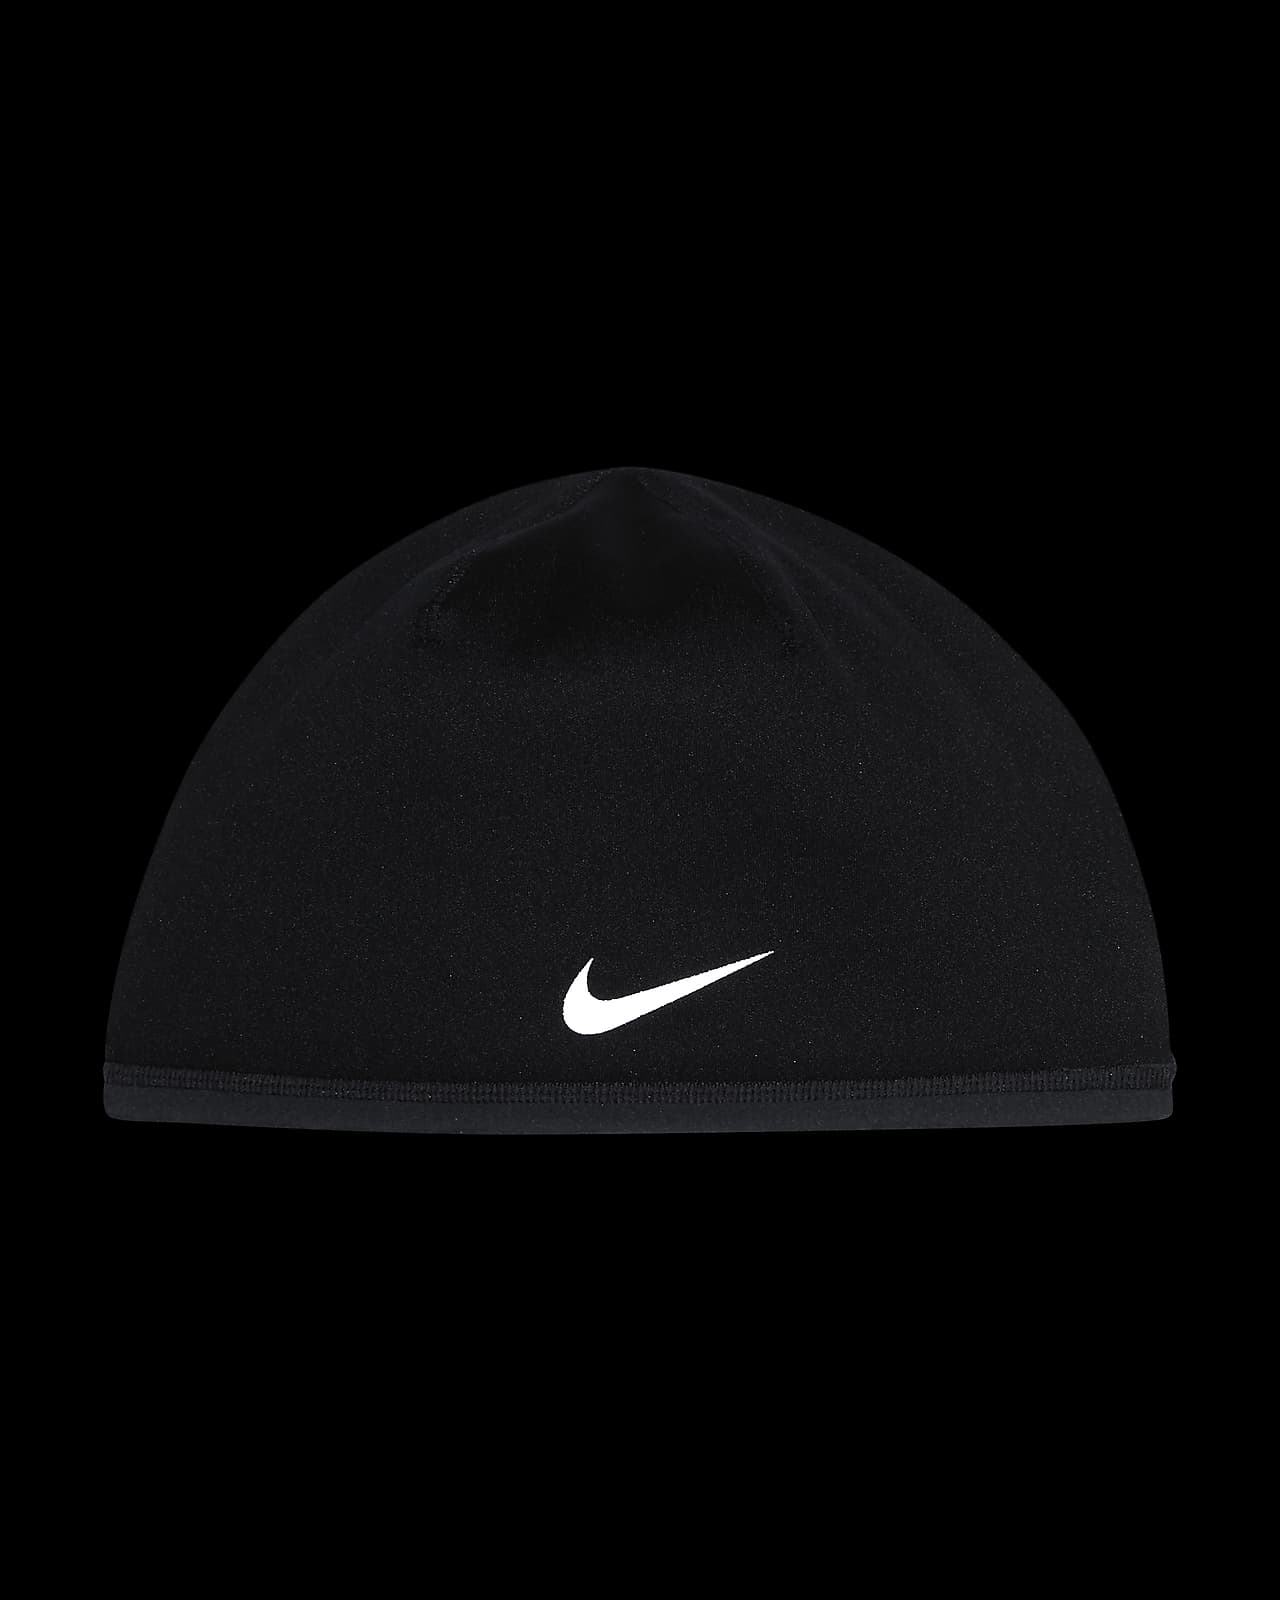 Nike Therma-FIT Running Hat and Glove Set. Nike.com